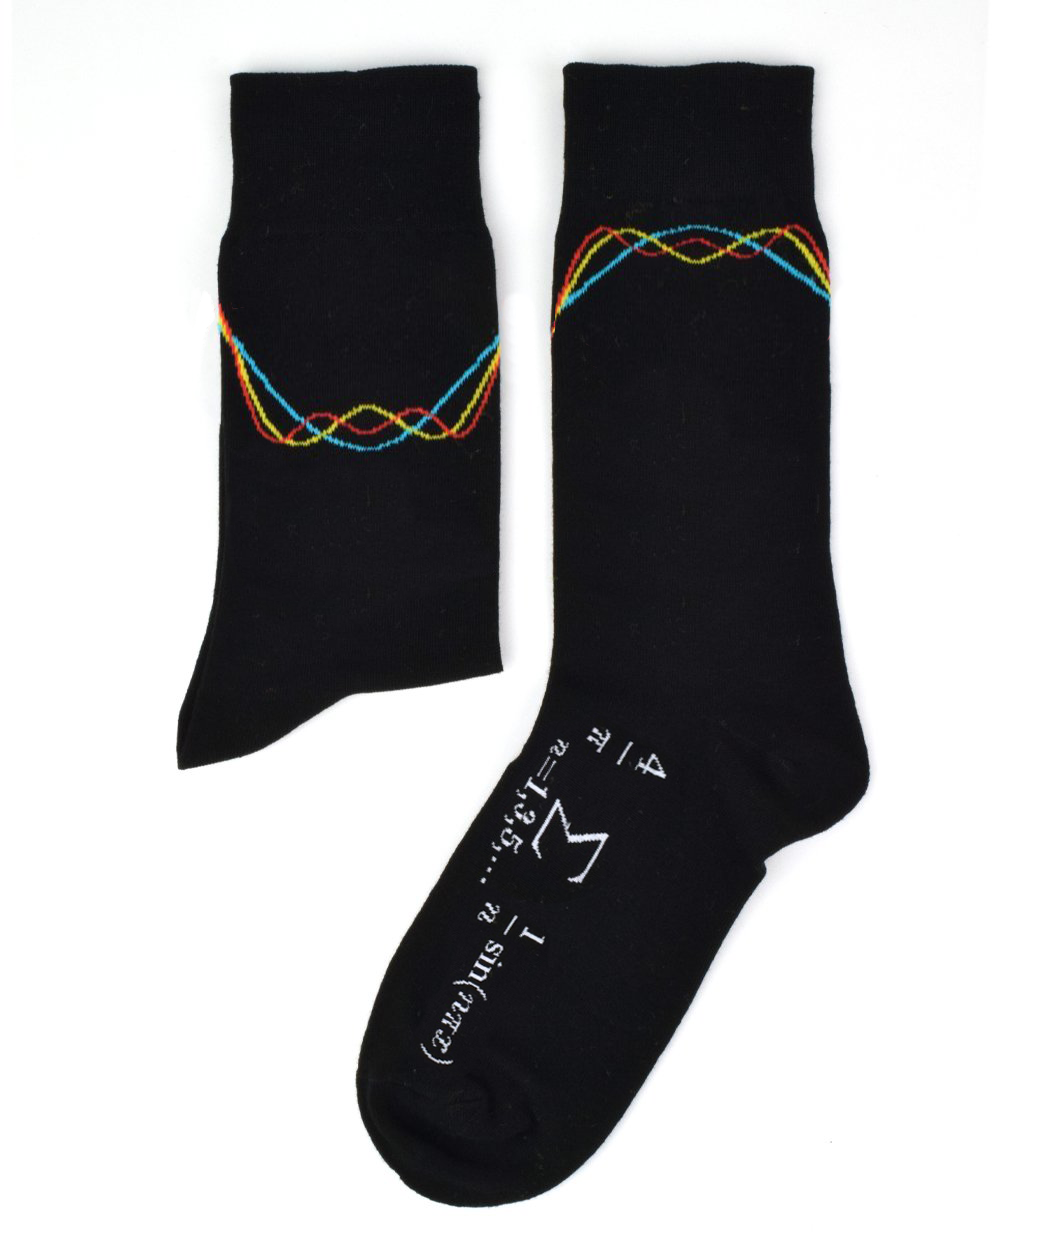 A black sock with red, yellow, and red arching lines at the top of the sock with a math equation in white on the side of the foot - from 3Blue1Brown.